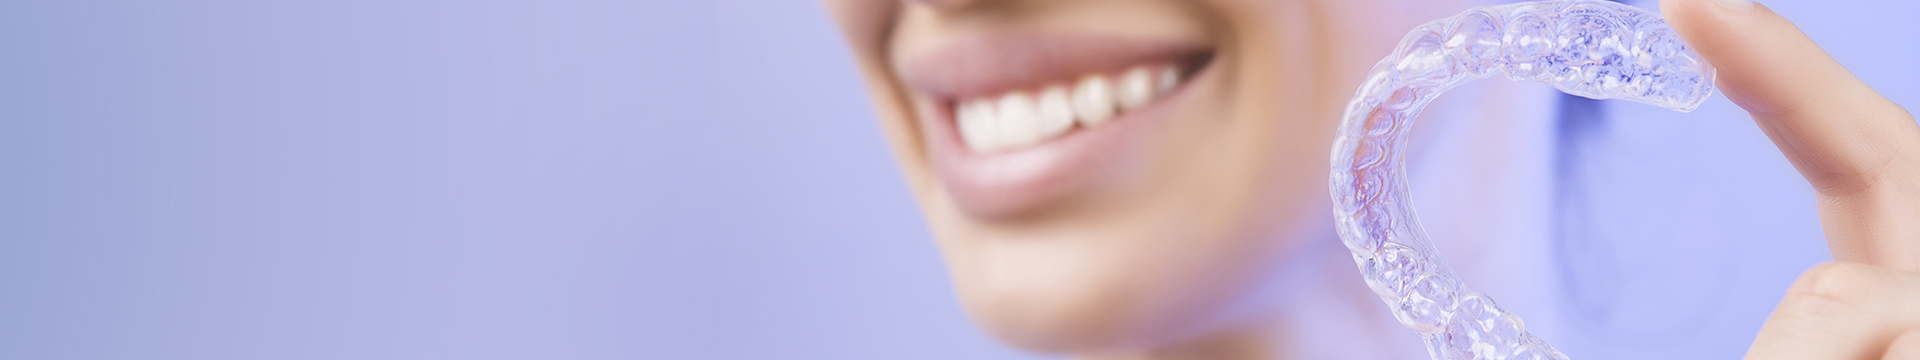 Cropped image of woman holding a dental night guard